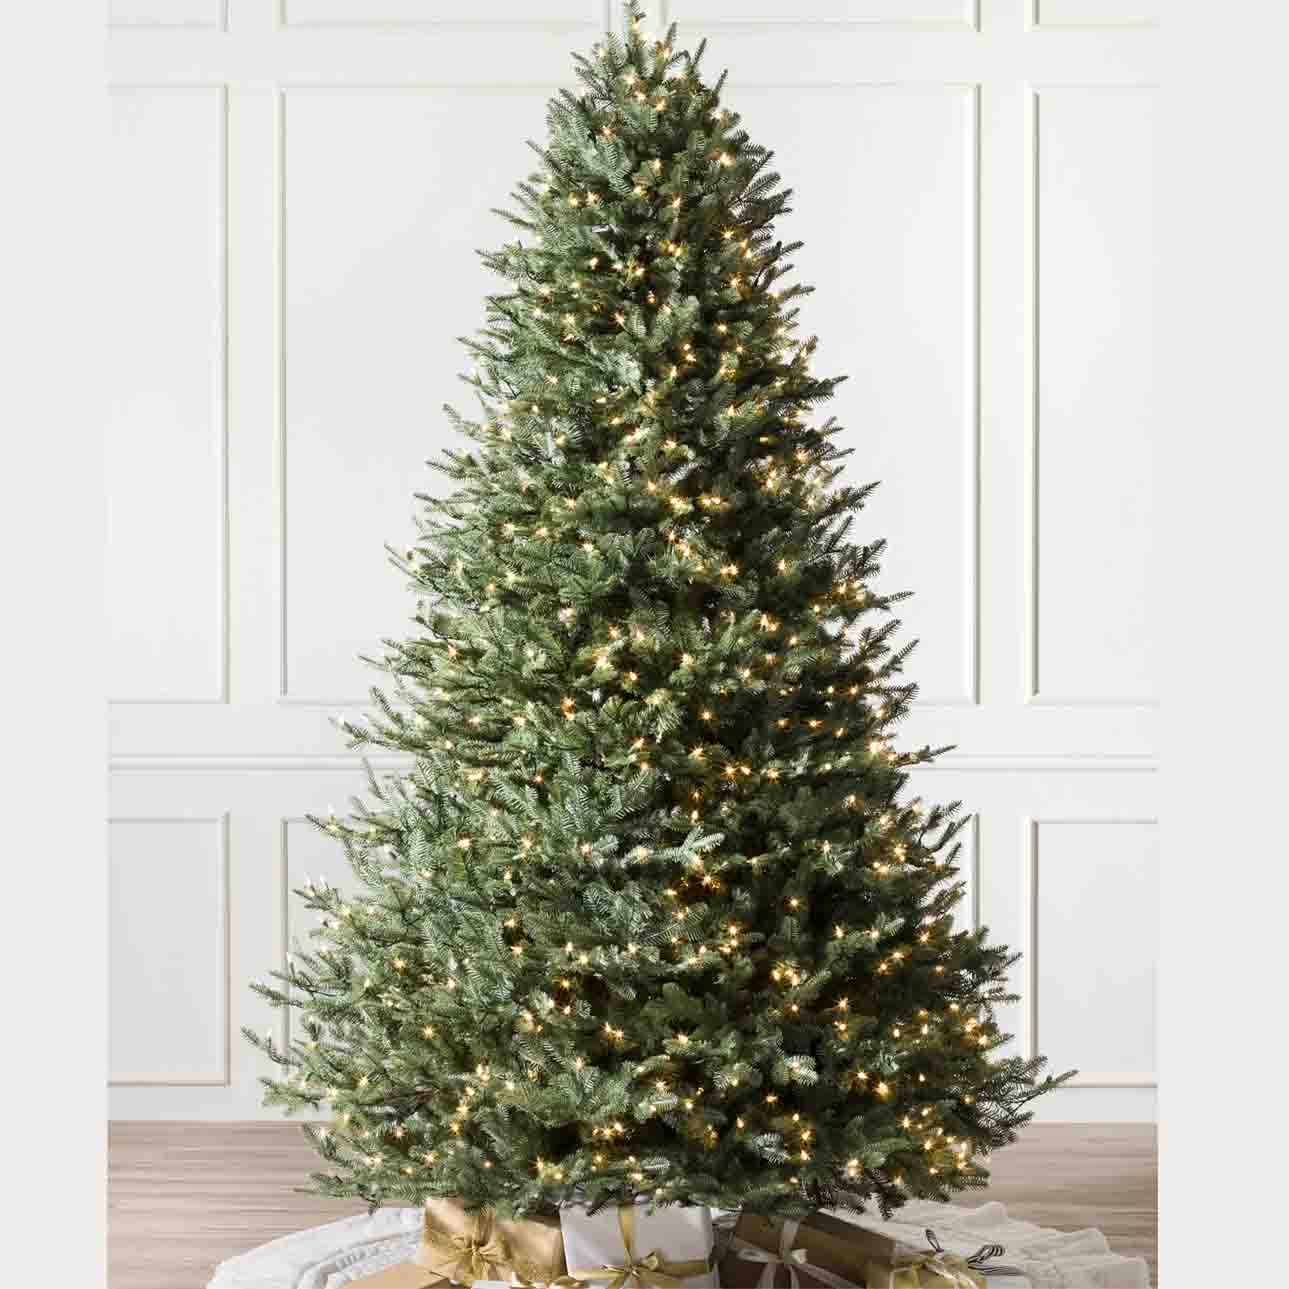 a 7.5ft green artificial BH Balsam Fir Tree with LED lights with gifts under the tree